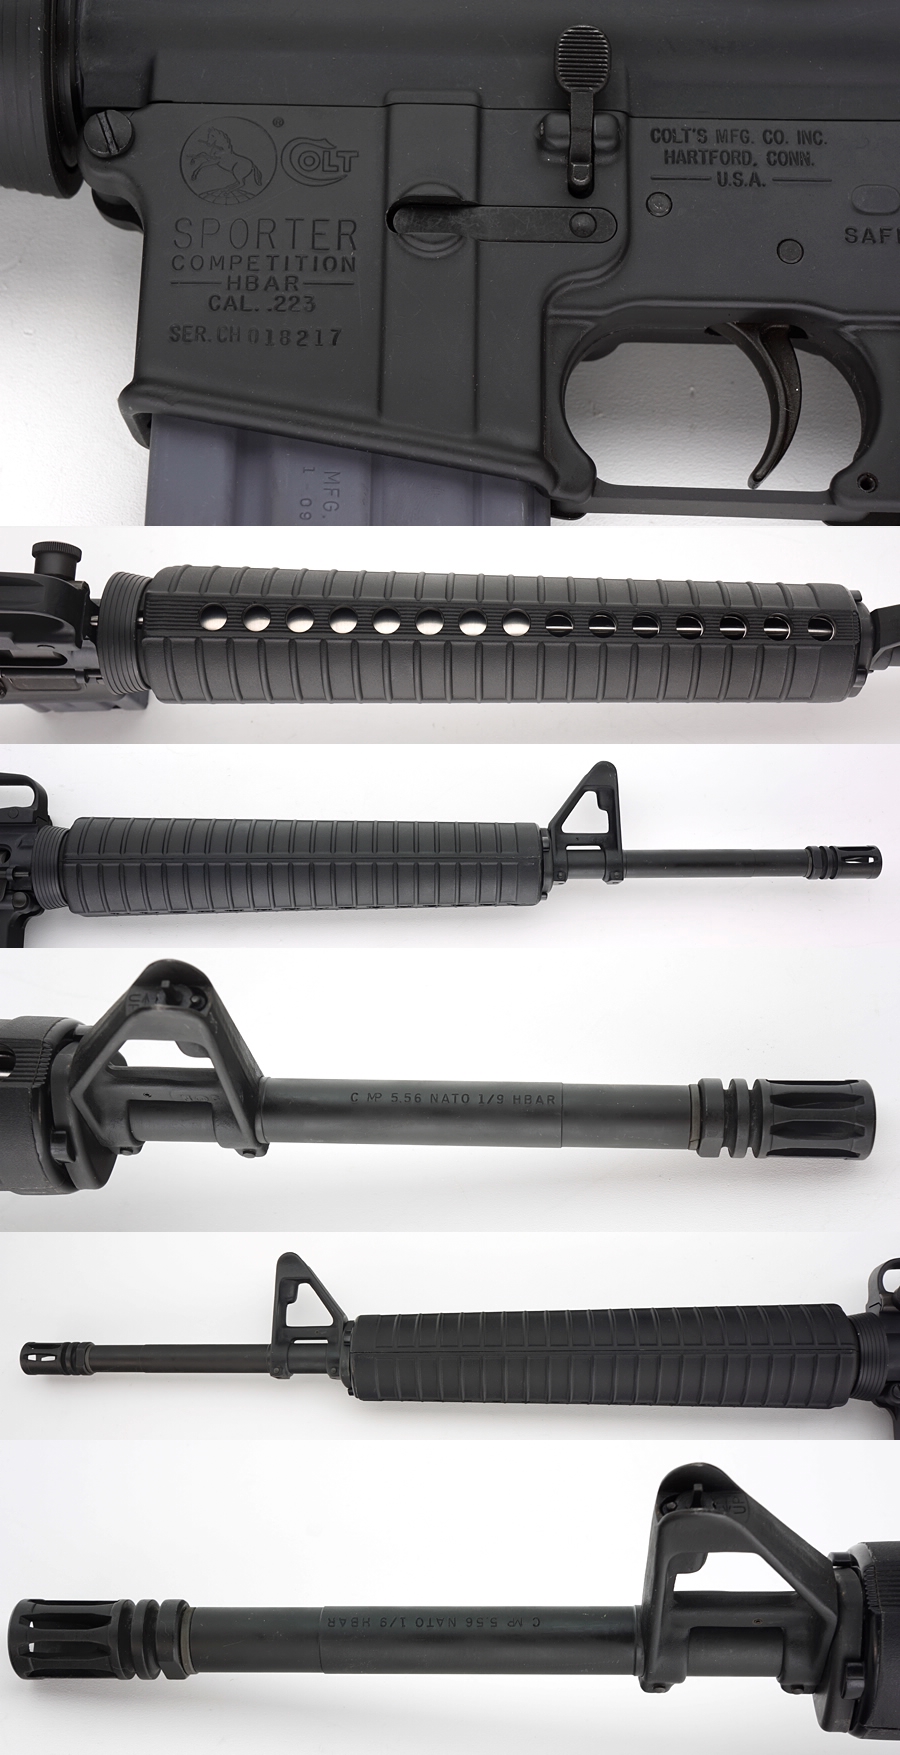 Colt ar 15 a2 serial numbers